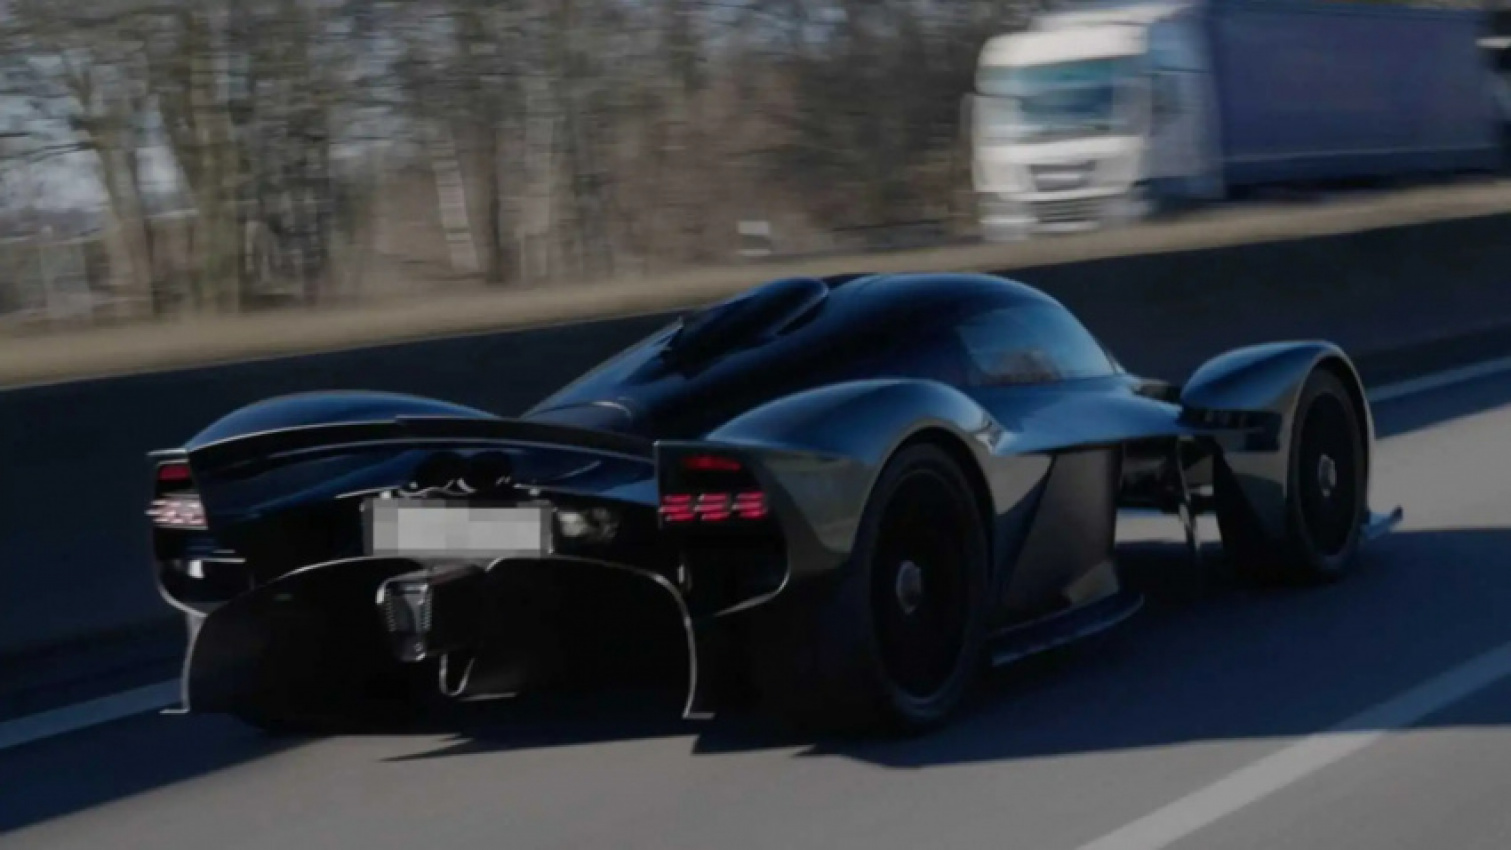 aston martin, autos, cars, reviews, car, cars, driven, driven nz, hybrid, just listen to that v12, motoring, new zealand, news, nz, v8 supercars, video, video-news, watch: aston martin valkyrie takes to road, world, watch: aston martin valkyrie takes to the road, just listen to that v12